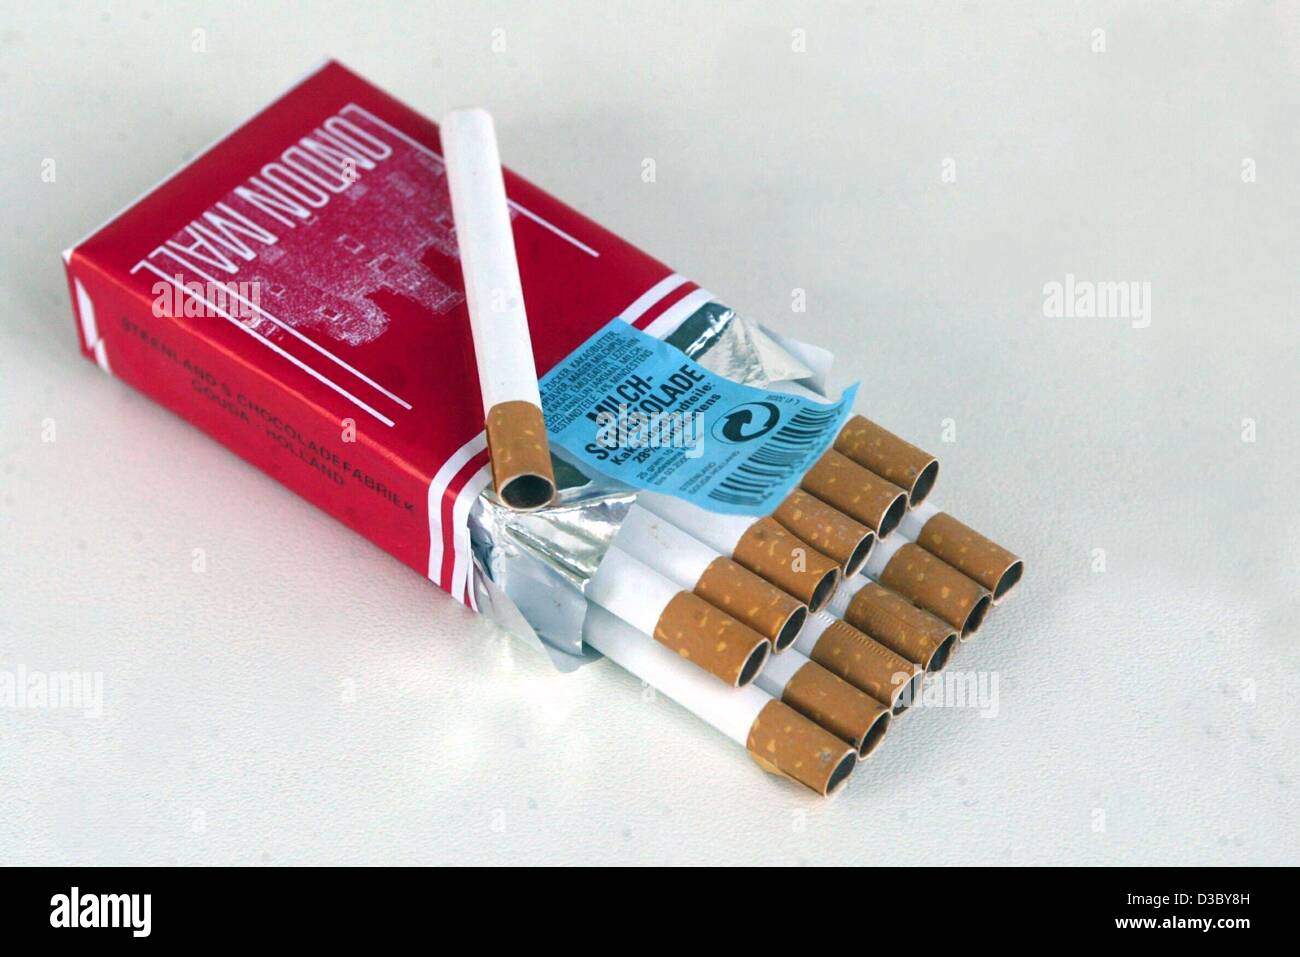 (dpa) - An opened pack of cigarettes made of chocolate lie on a table ...